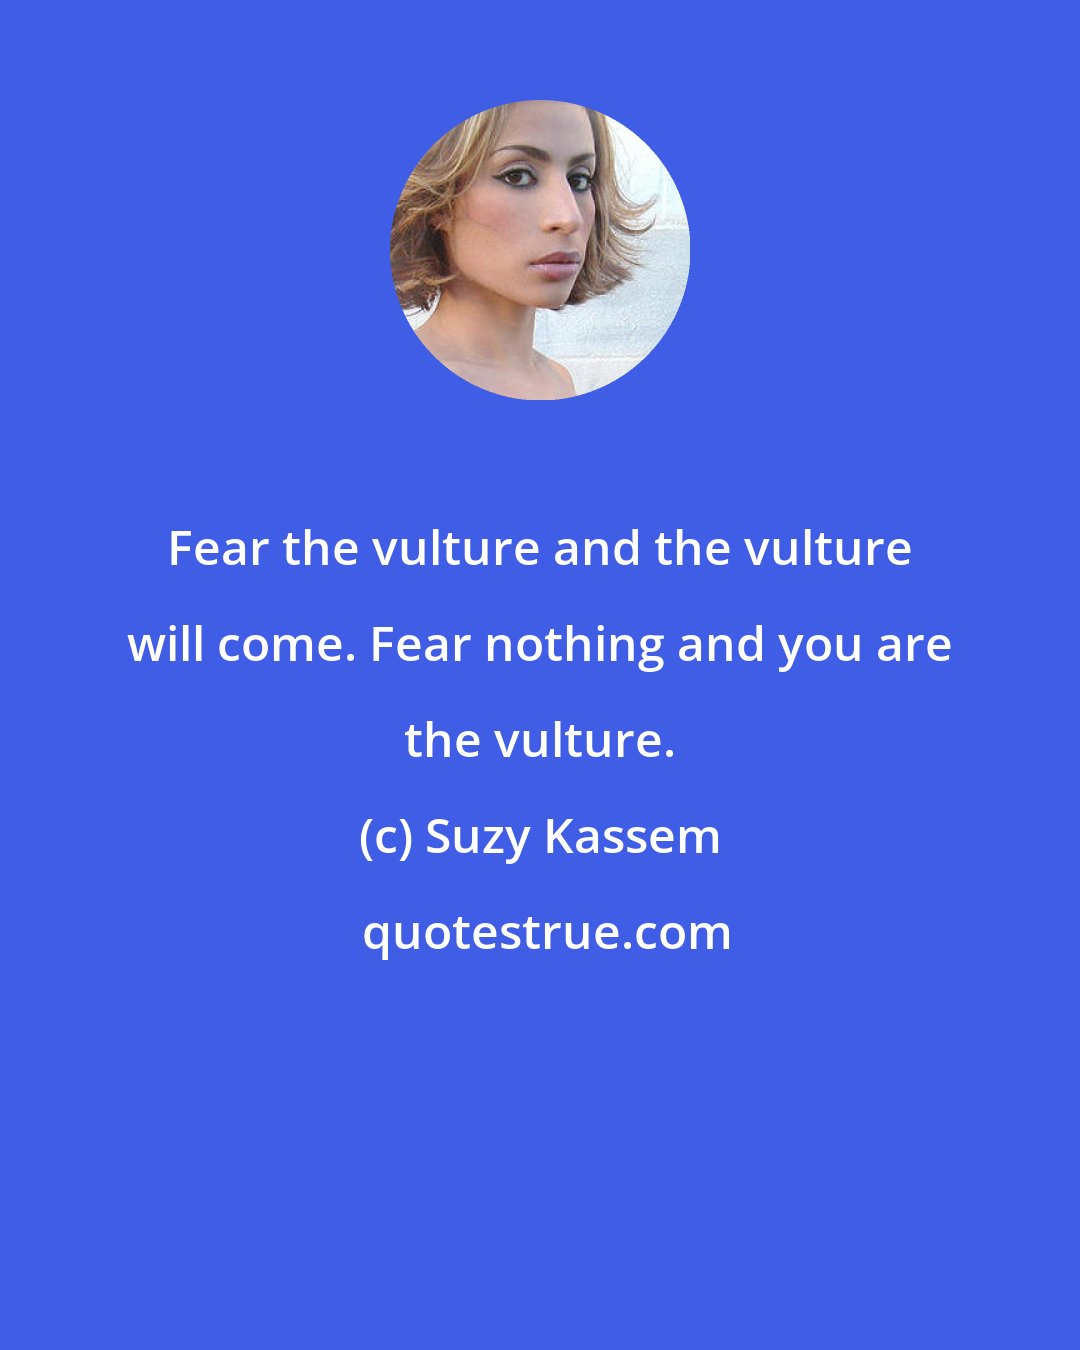 Suzy Kassem: Fear the vulture and the vulture will come. Fear nothing and you are the vulture.